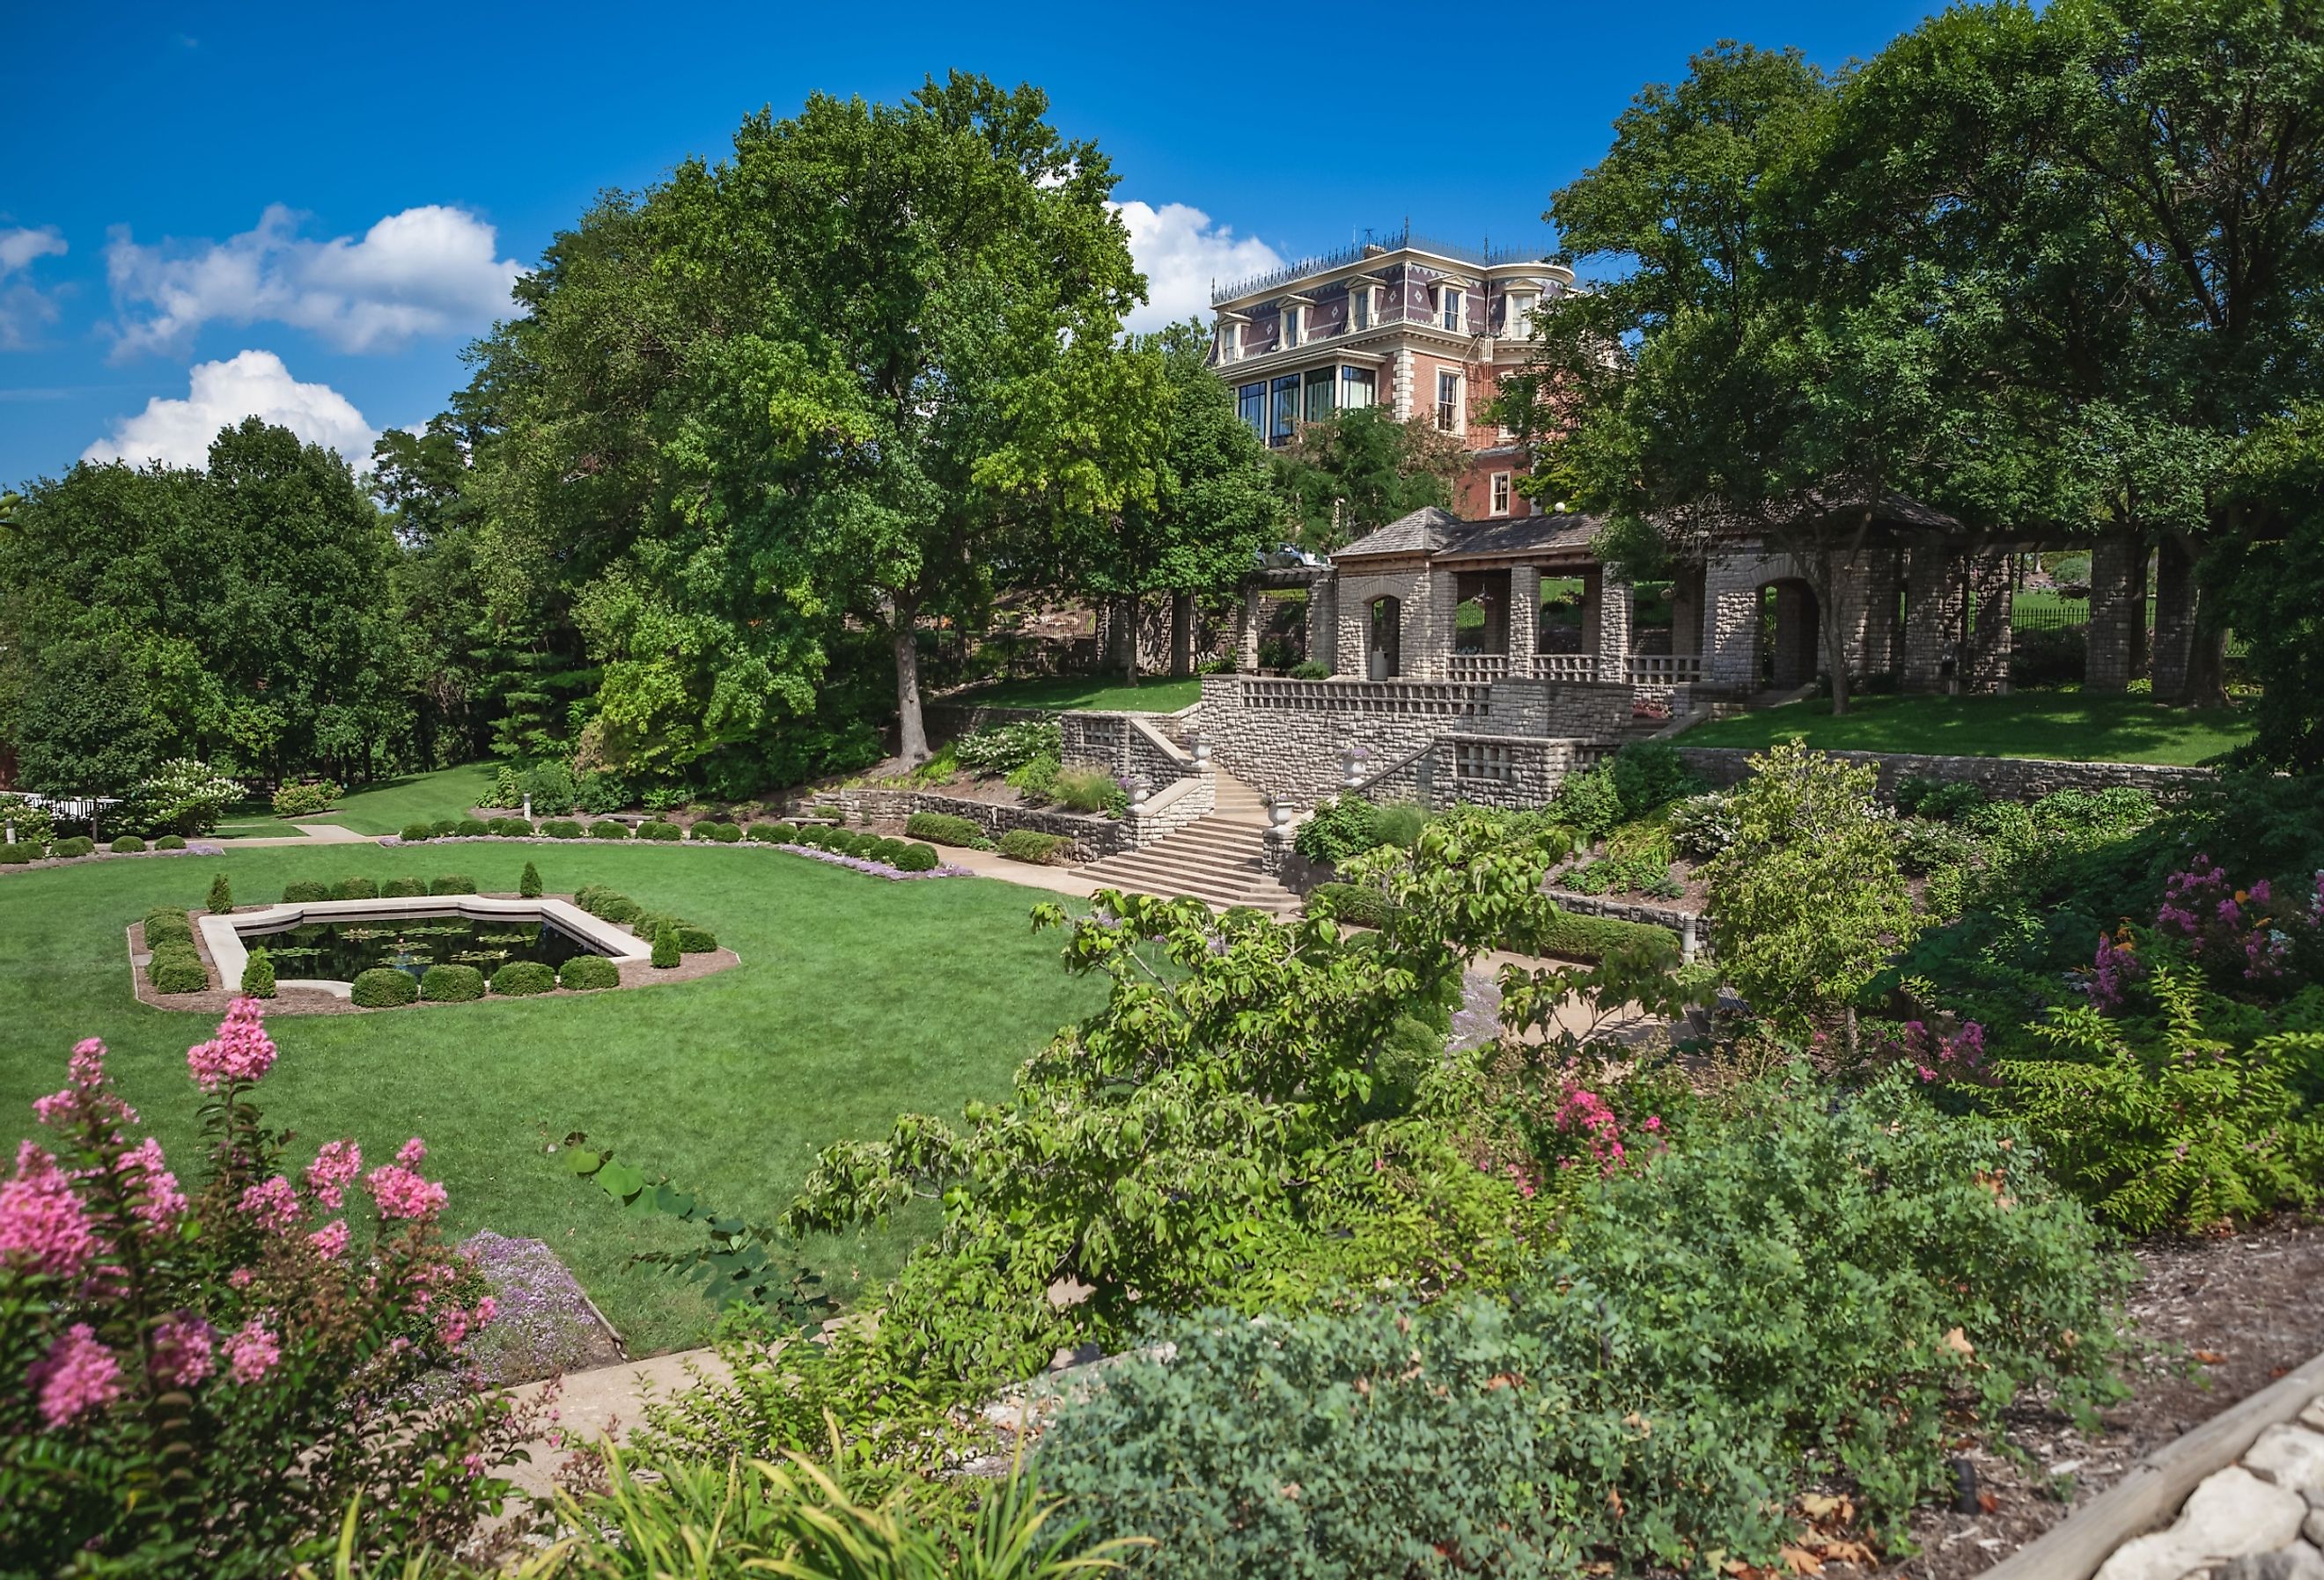 Carnahan Memorial Garden at the rear of the Missouri Governor's mansion in the Missouri State Capitol Historic District in Jefferson City, Missouri. Image credit eurobanks via Shutterstock.